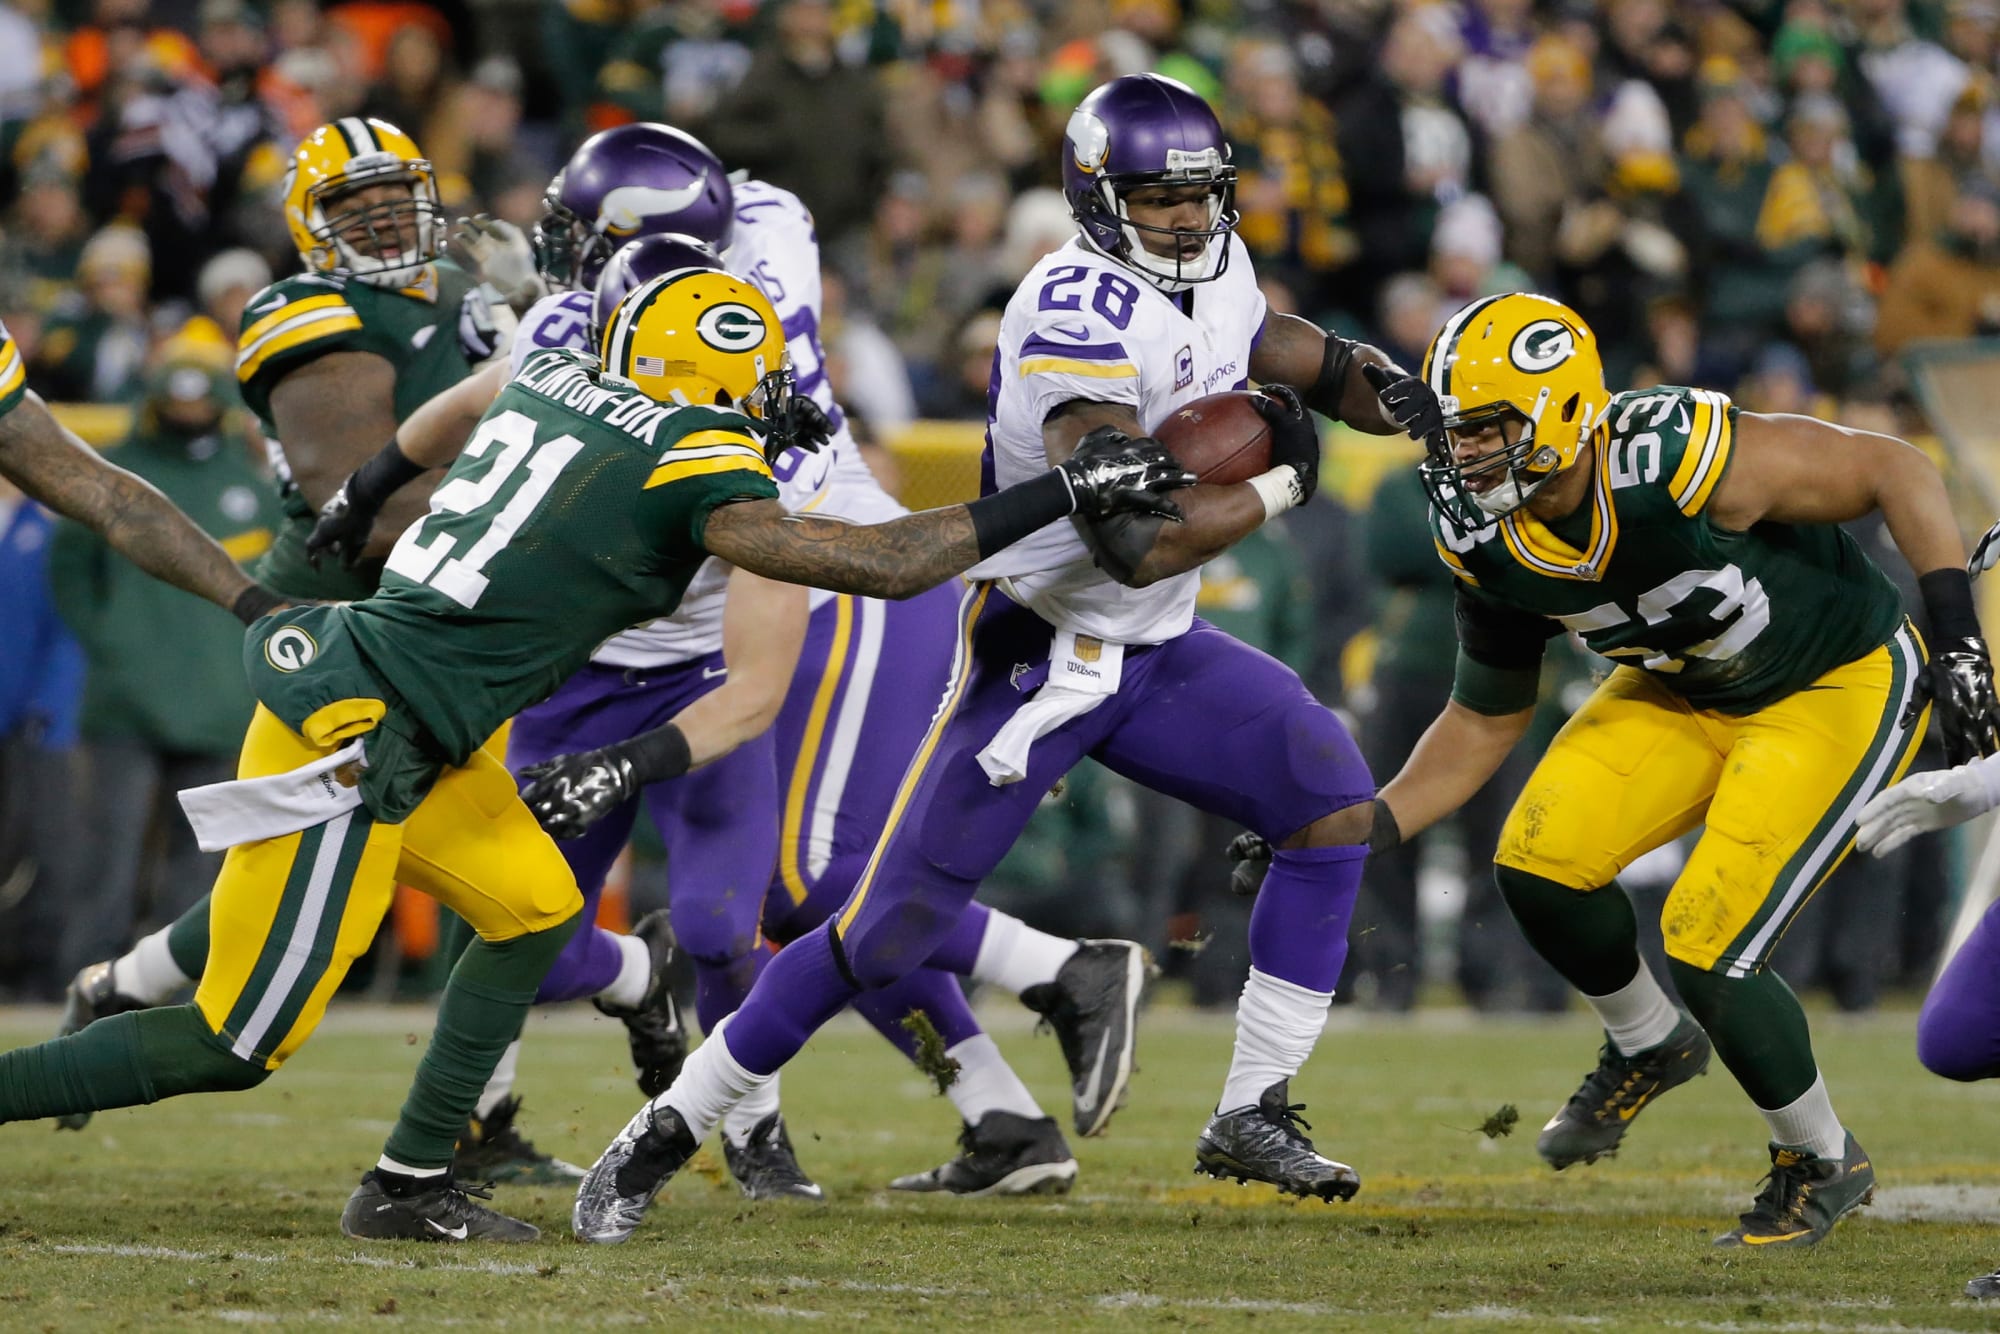 Flashback Vikings defeat Packers to win the NFC North in 2015